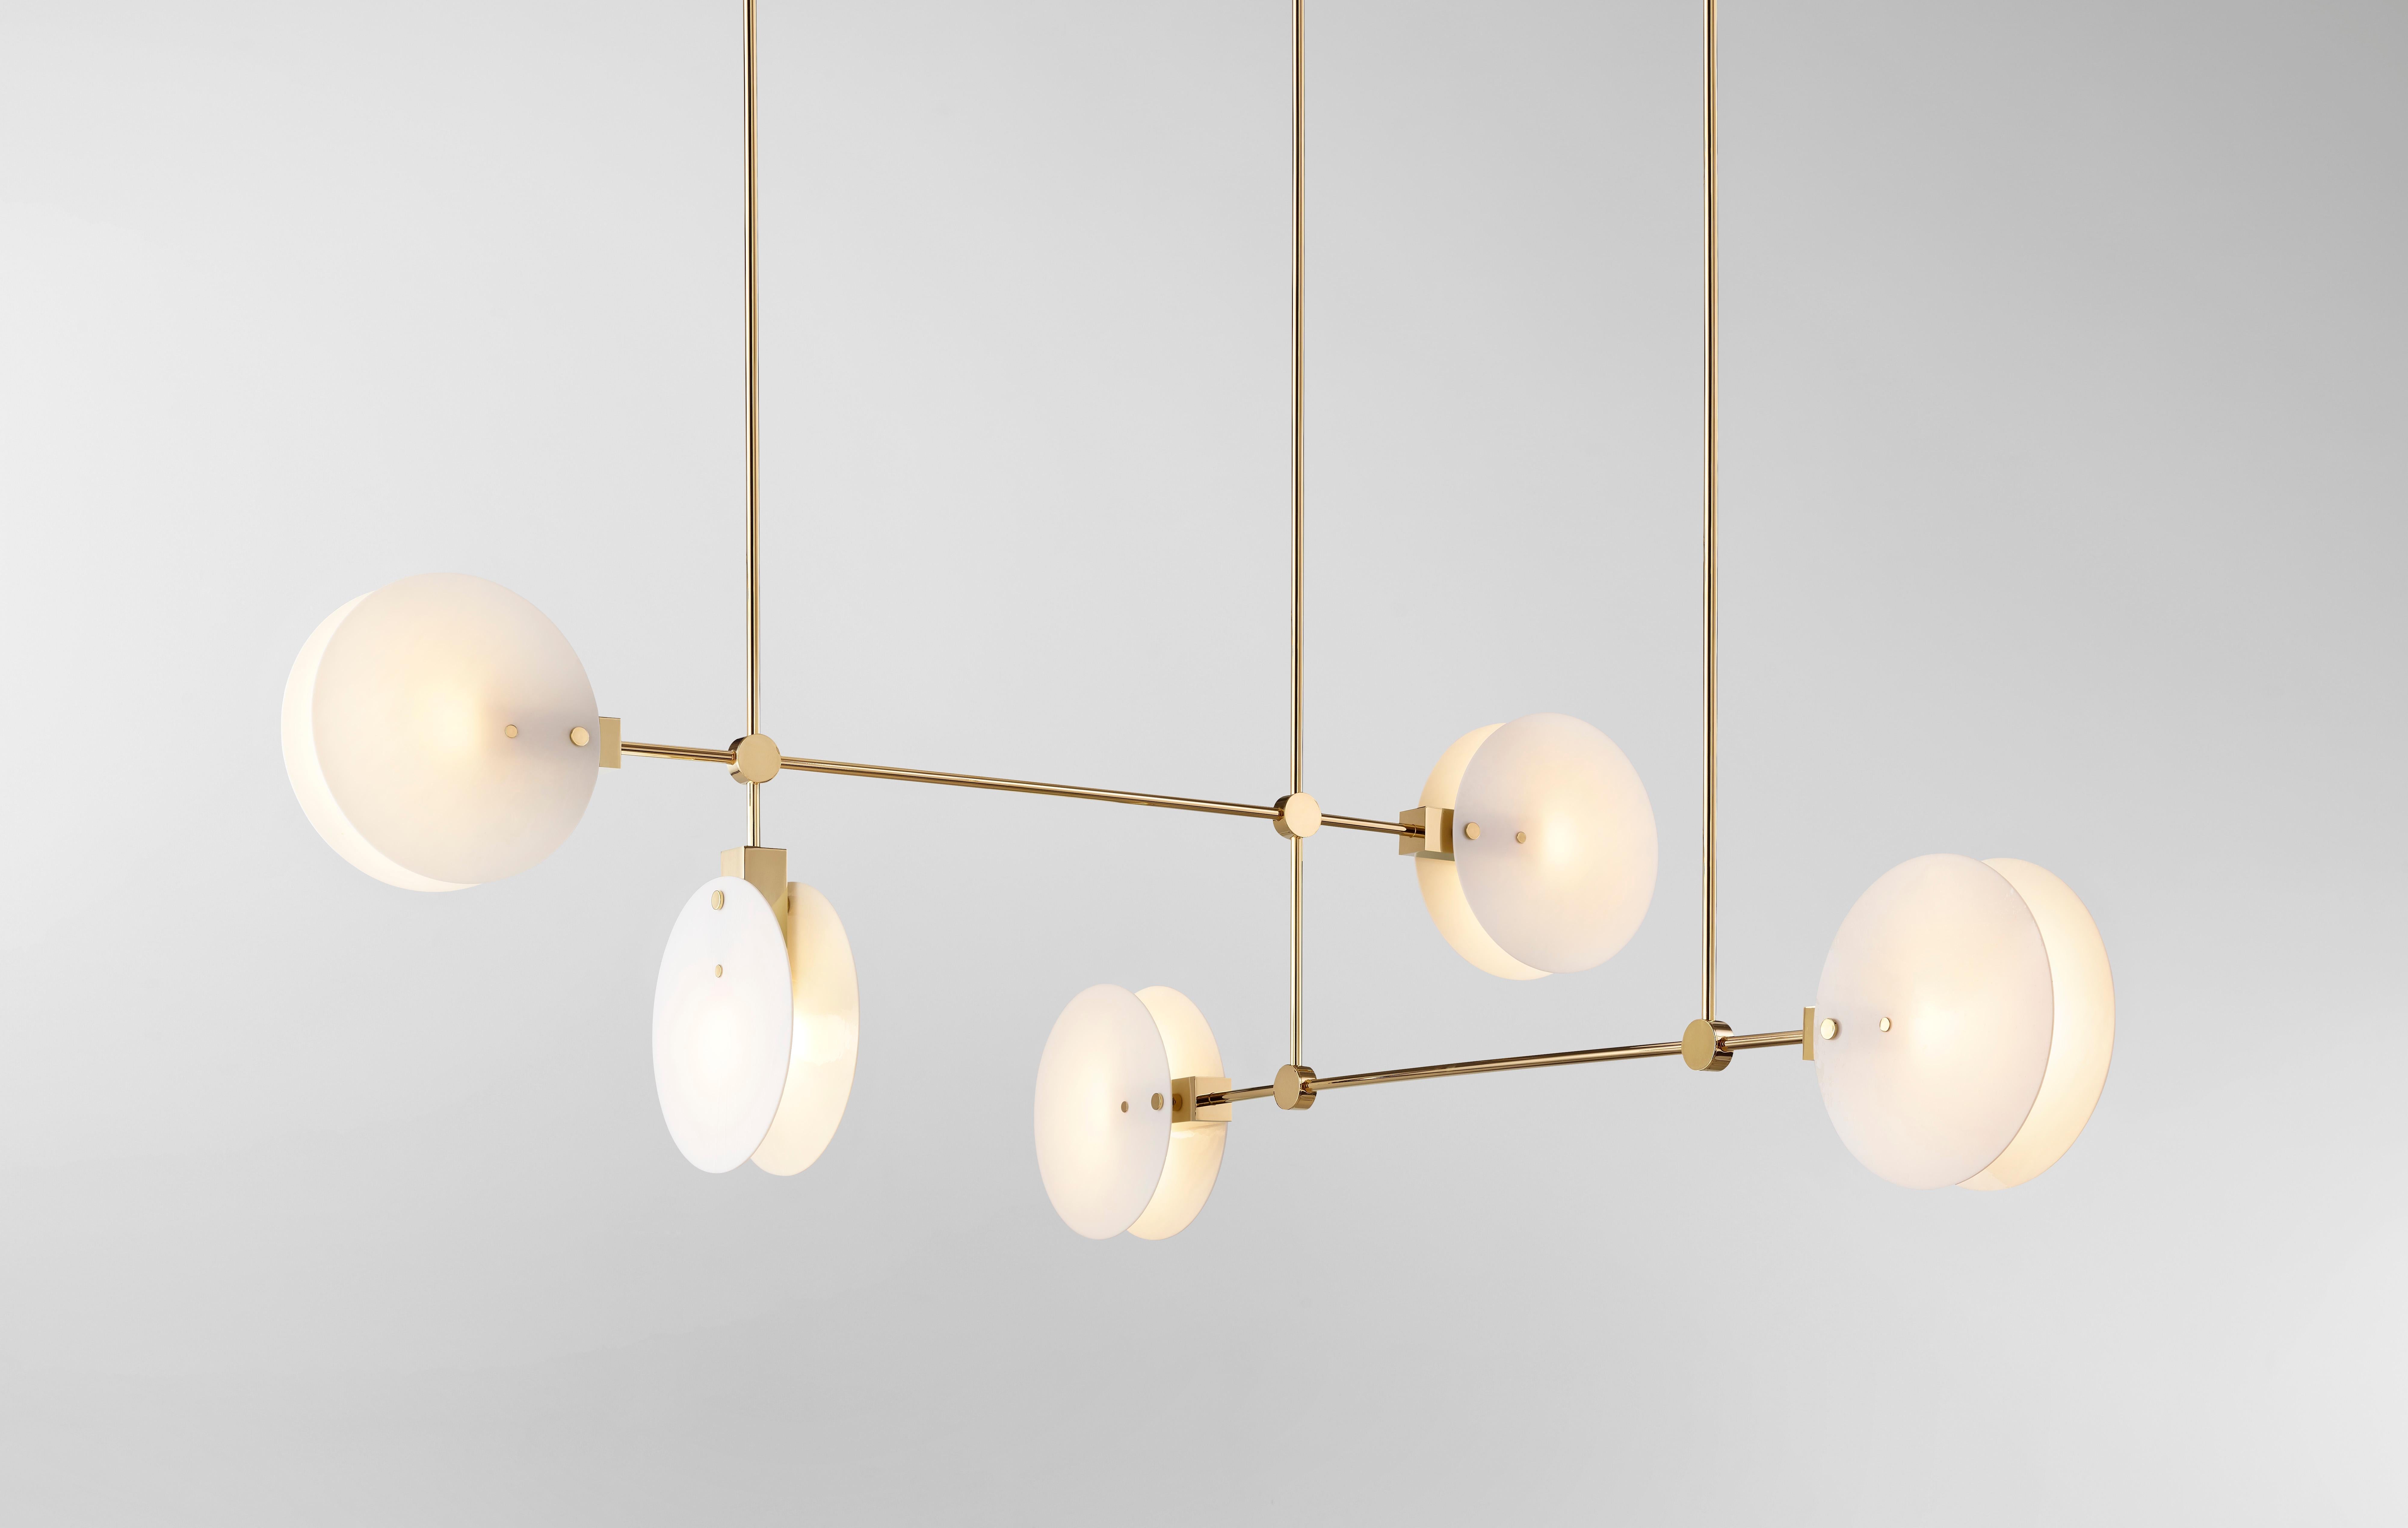 The Nebulae Collection takes its name from the natural phenomena of interstellar clouds and their dynamic layered lighting effects. The geometric machined forms coupled with the fluid glass discs create balance between the elements.

The Limited